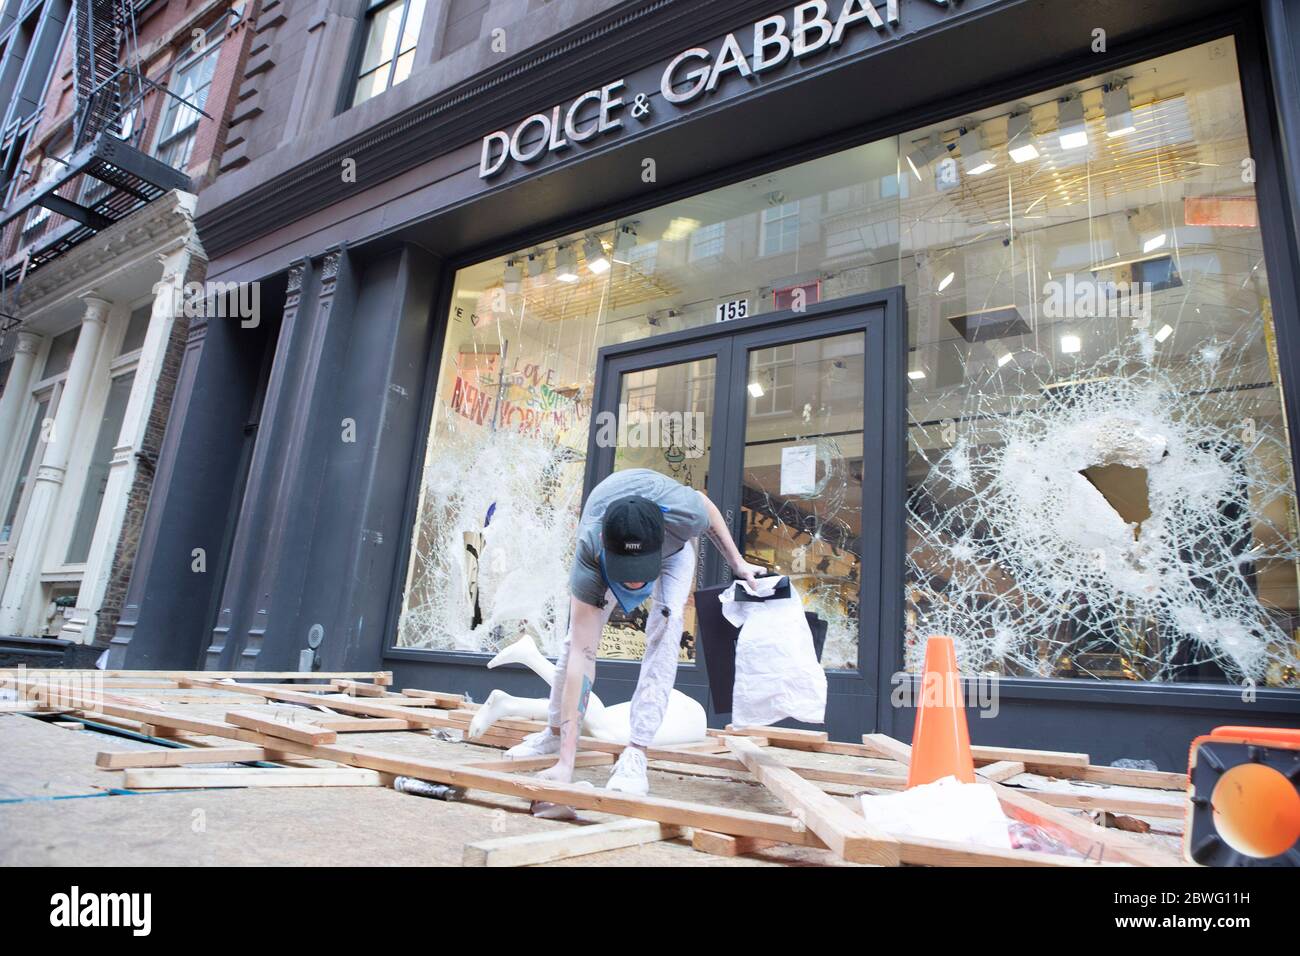 New York, New York, USA. 1st June, 2020. A volunteer from the SoHo neighborhood helps clean up the destruction from The Dolce Gabbana store in Soho which was looted early Monday morning in New York, New York, Many other er New York Stores were also damaged and over 200 arrest were made from the Soho looting Credit: Brian Branch Price/ZUMA Wire/Alamy Live News Stock Photo